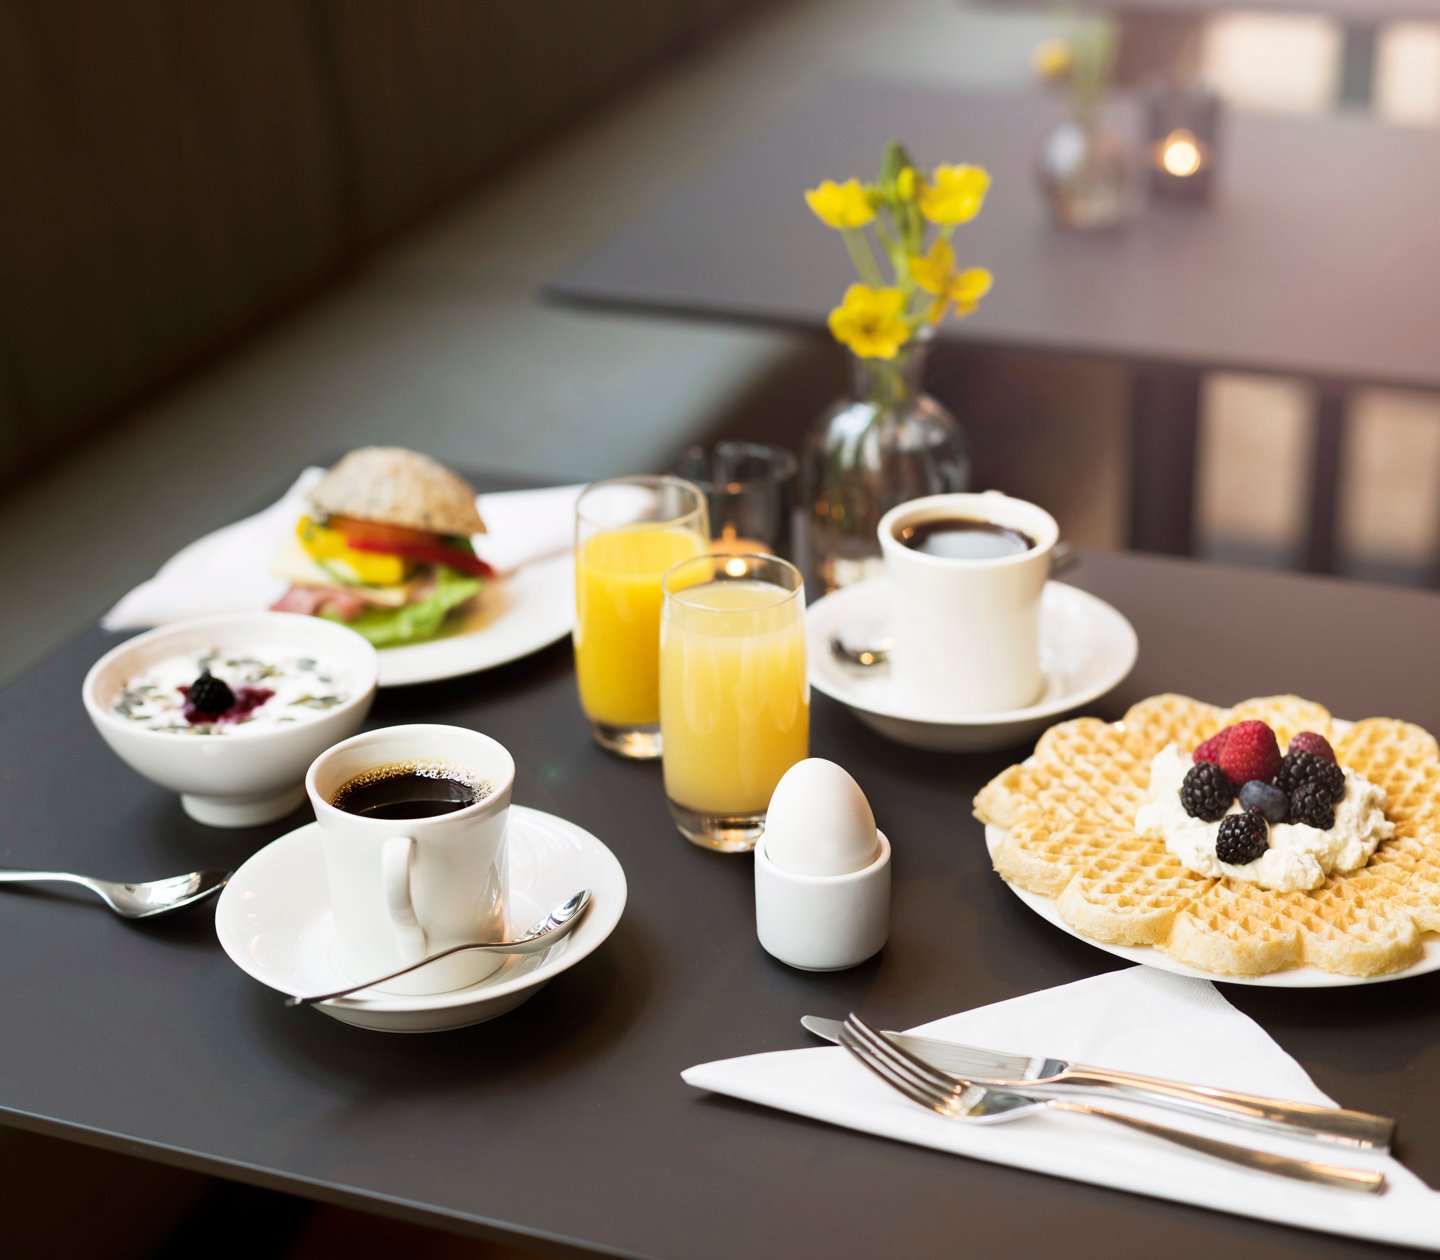 Breakfast laid out on the table with juice, coffee and waffles